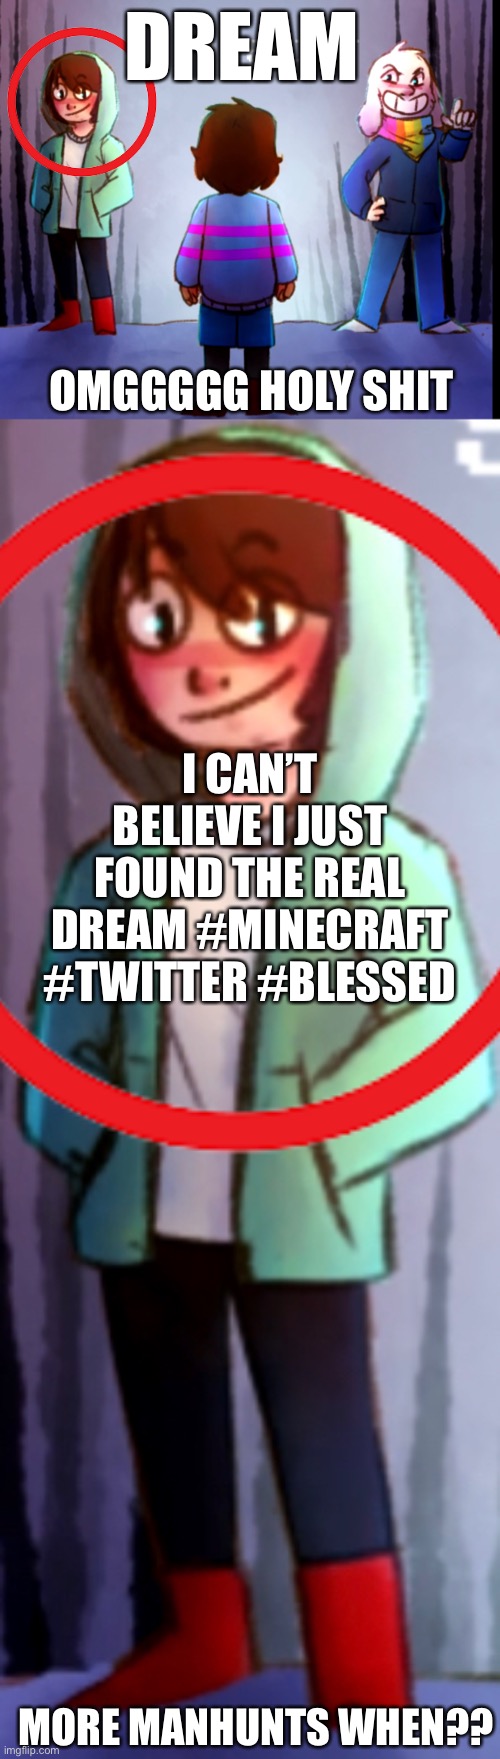 Dream is here!! |  DREAM; OMGGGGG HOLY SHIT; I CAN’T BELIEVE I JUST FOUND THE REAL DREAM #MINECRAFT #TWITTER #BLESSED; MORE MANHUNTS WHEN?? | image tagged in dream,storyshift,chara,minecraft,undertale,dreamsmp | made w/ Imgflip meme maker